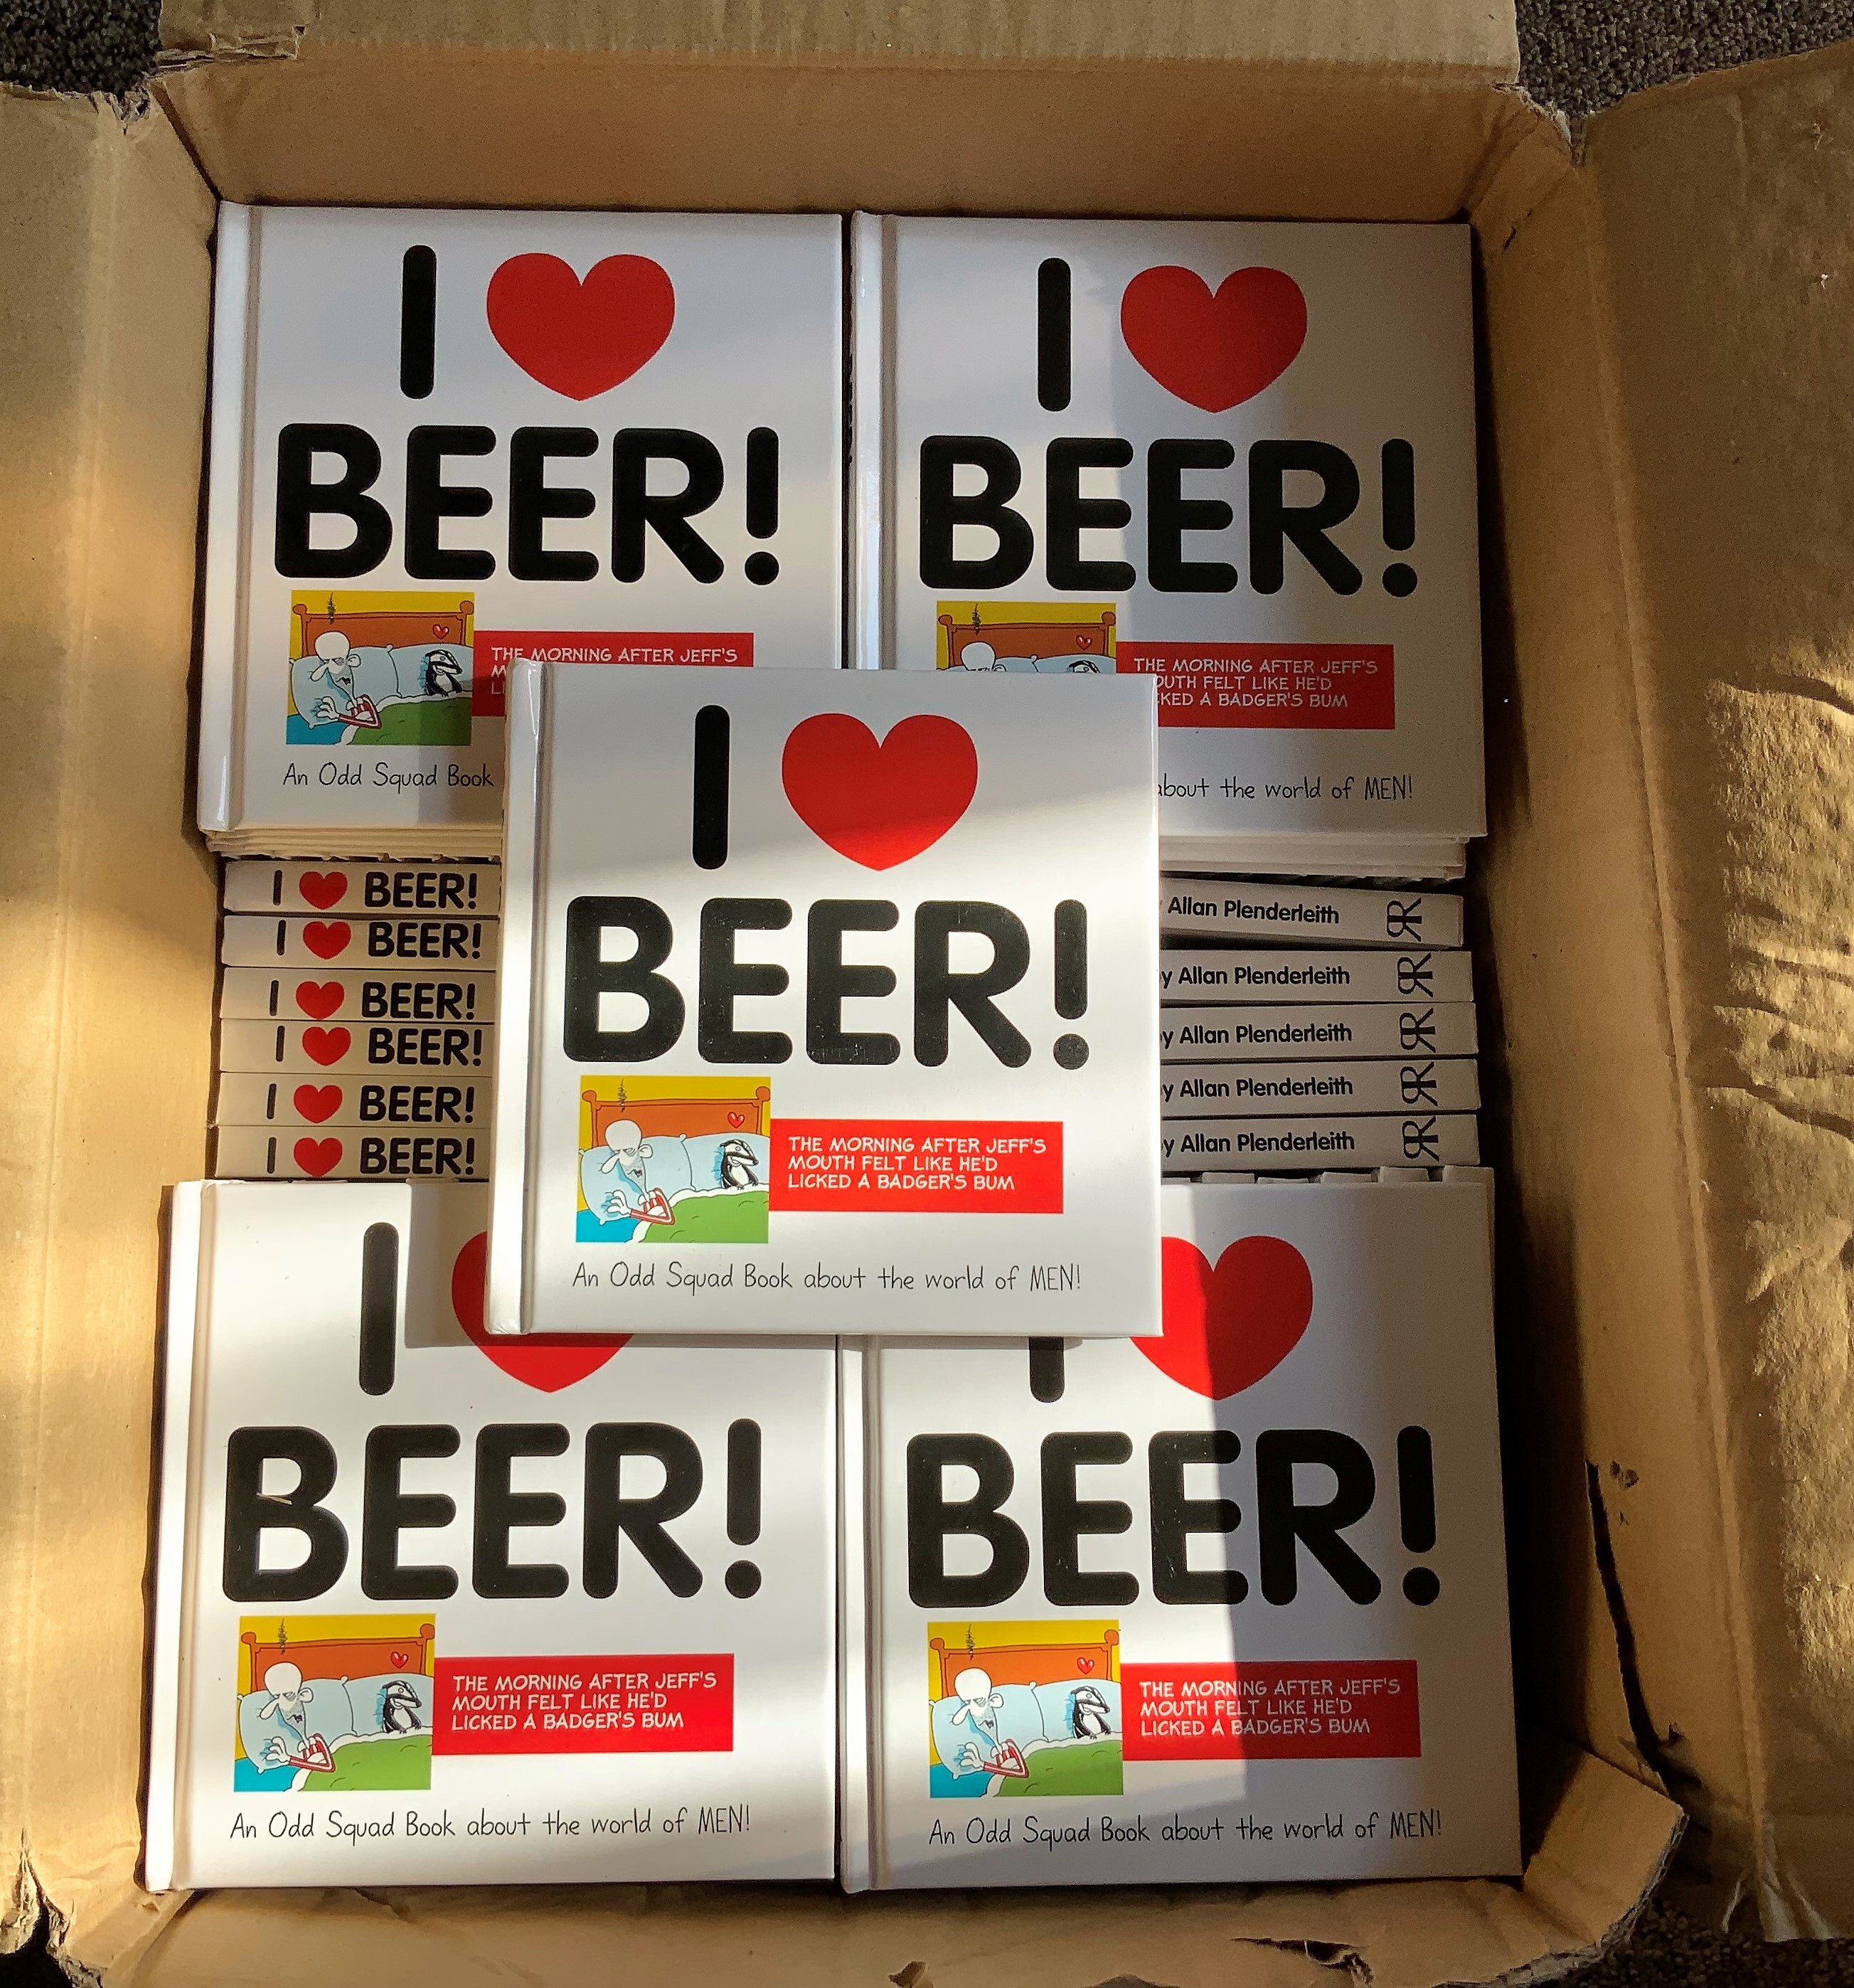 64 copies of I LOVE BEER (by The Odd Squad)